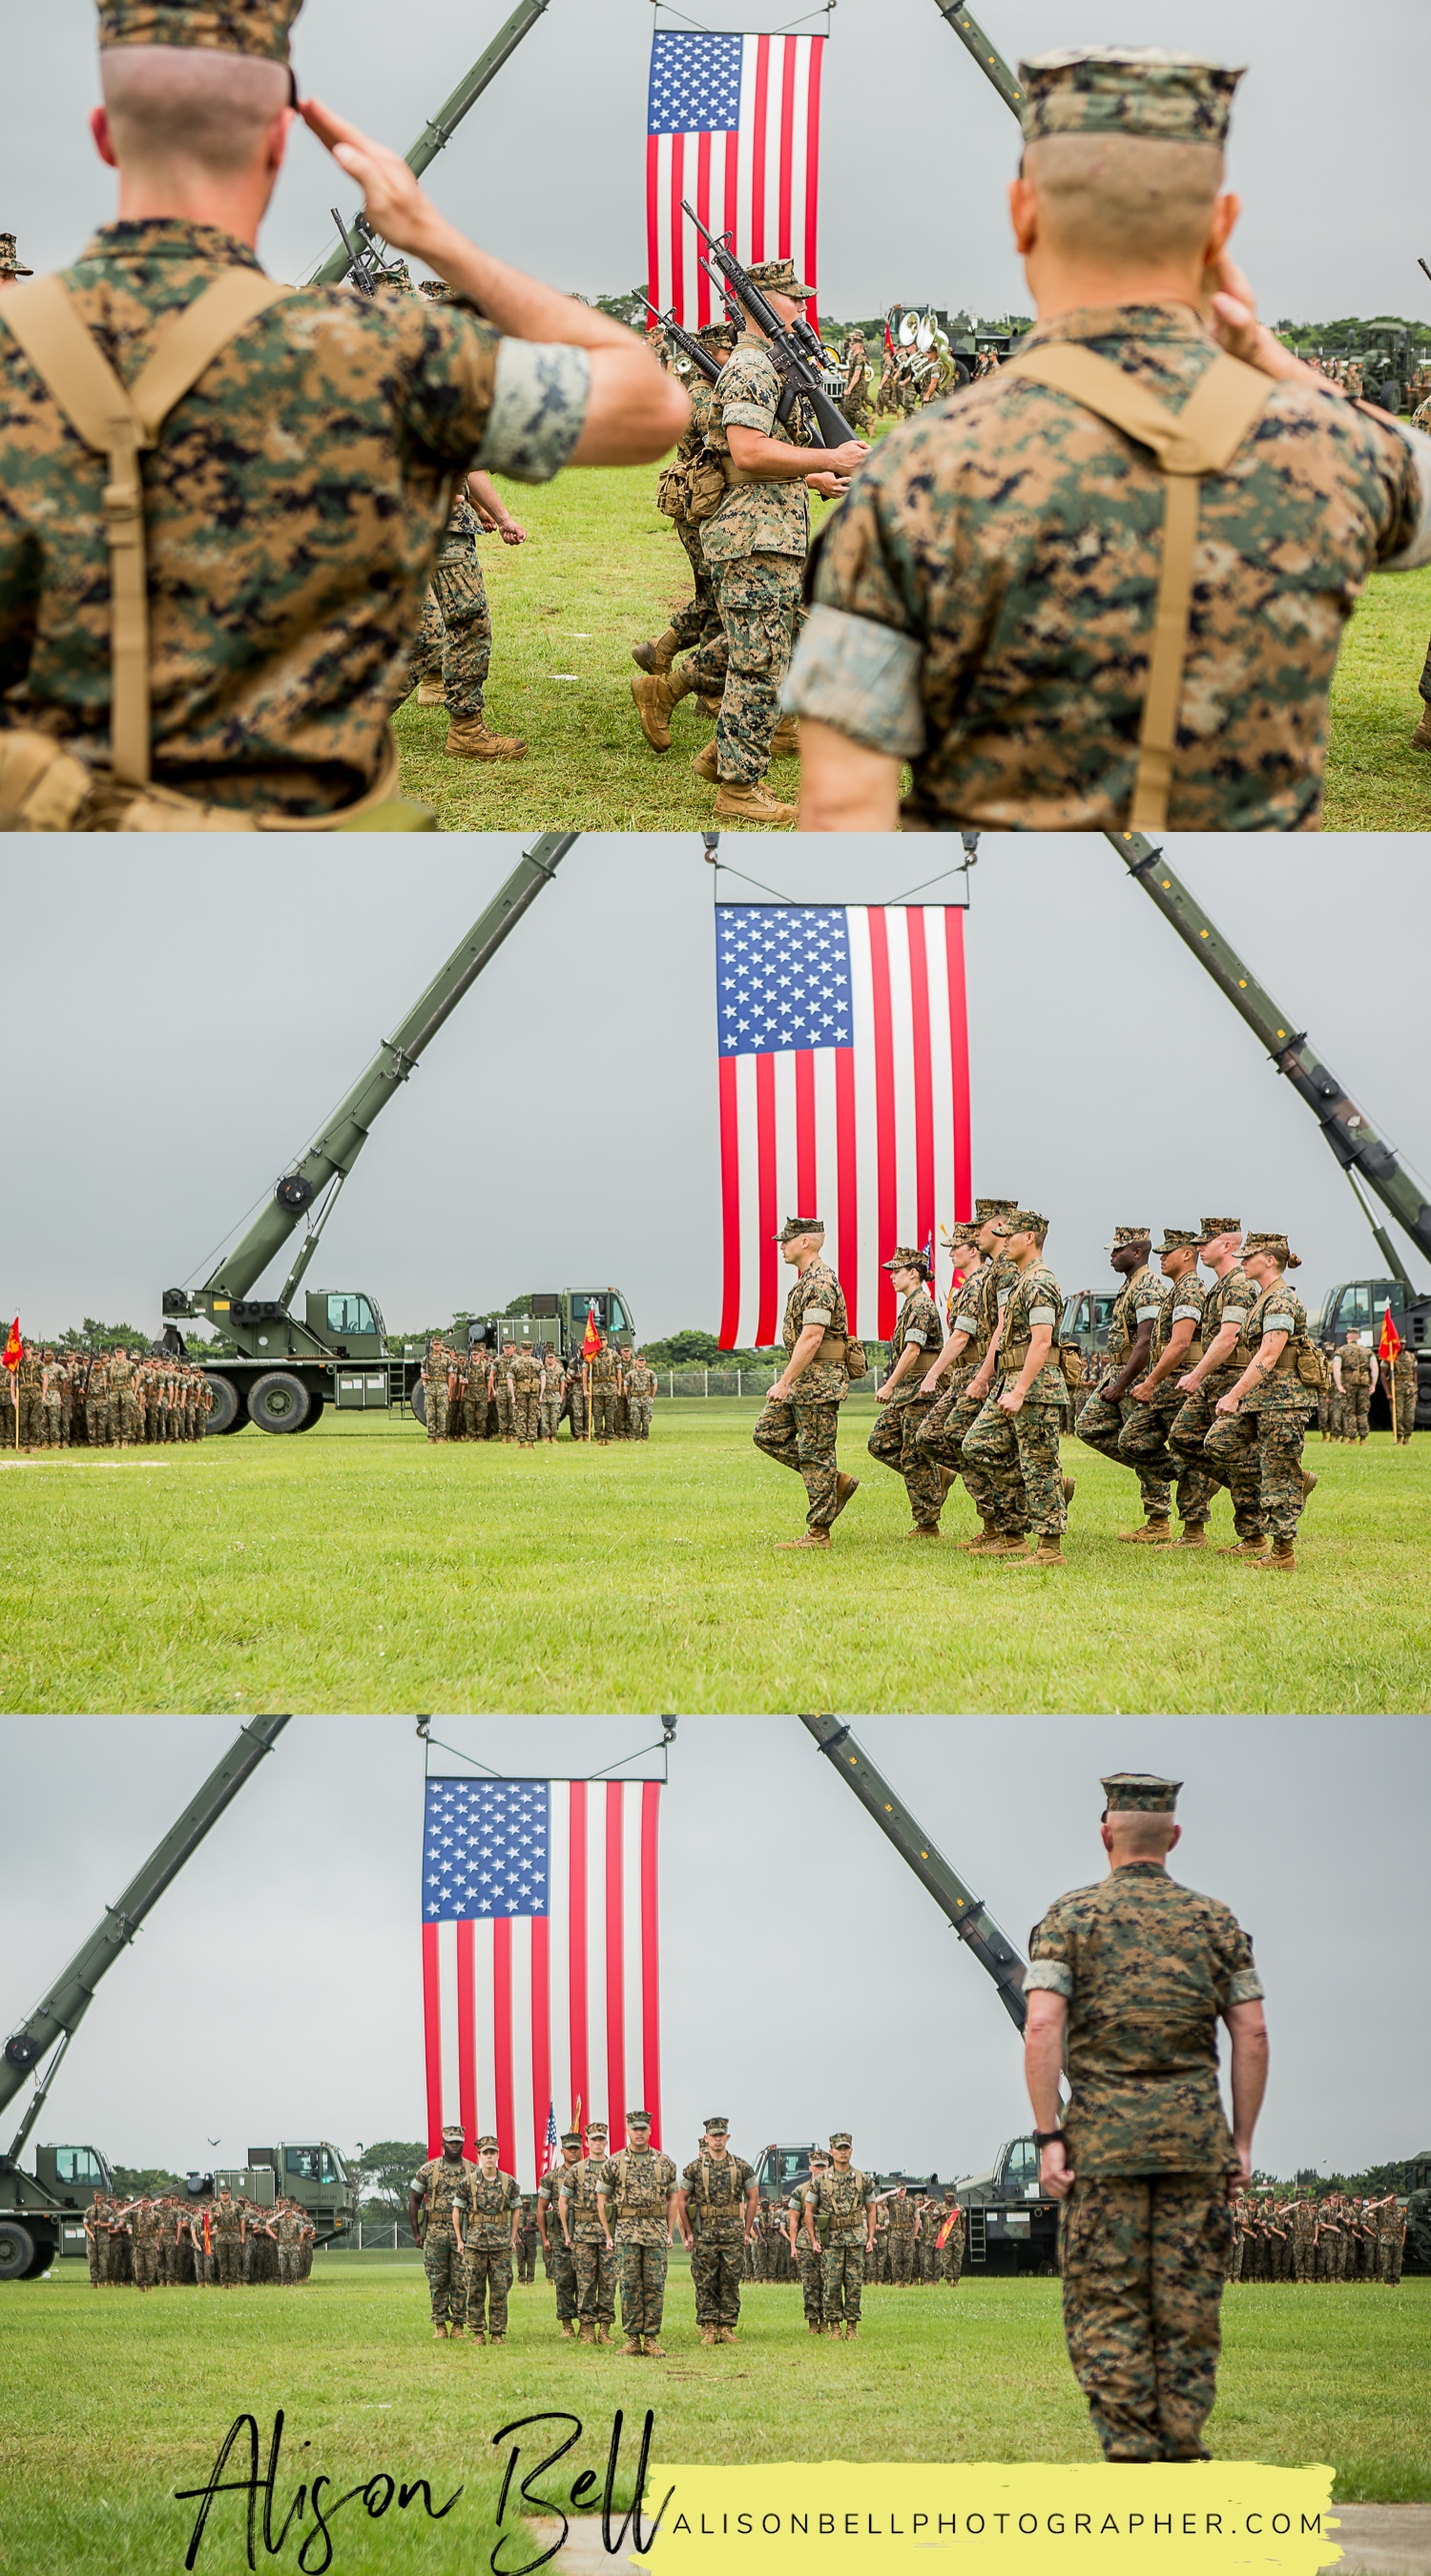 United States Marine Corps Change of Command Ceremony, 9th Engineer Support Battalion Camp Hansen, Okinawa Japan by Alison Bell, Photographer. #alisonbellphotog alisonbellphotographer.com